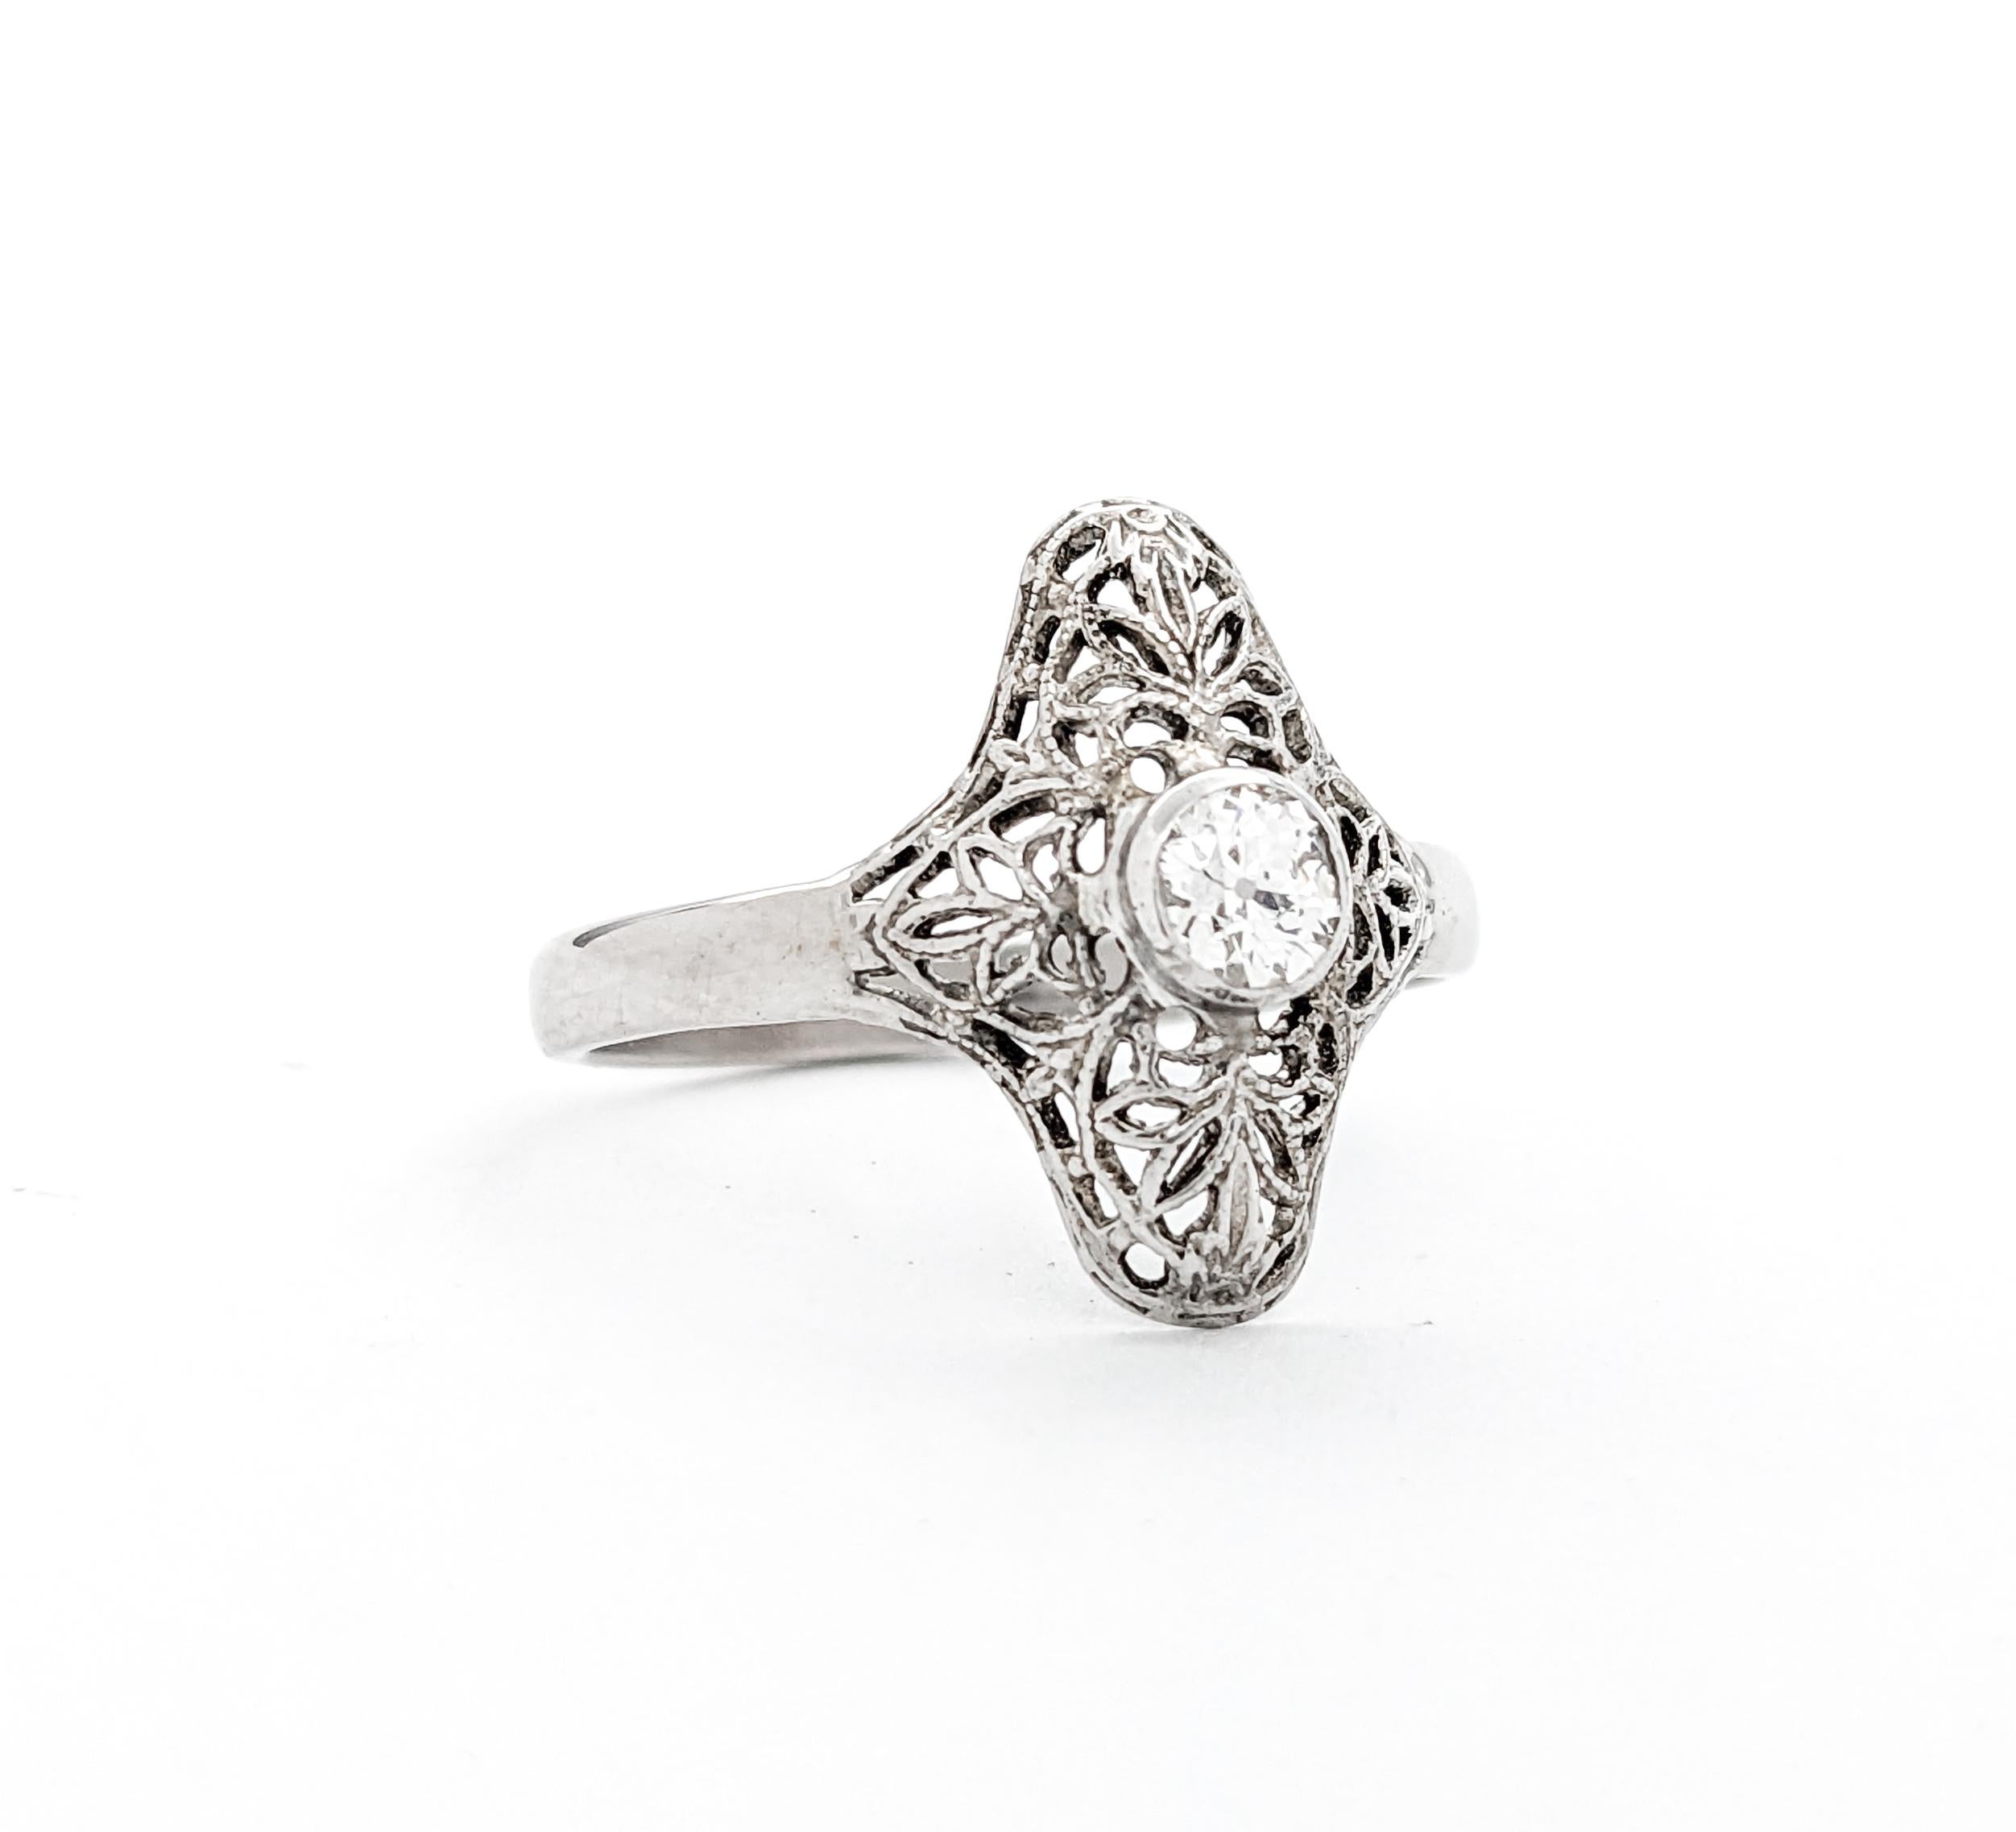 Antique Filigree Diamond Ring Art Deco Style Ring In White Gold In Excellent Condition For Sale In Bloomington, MN